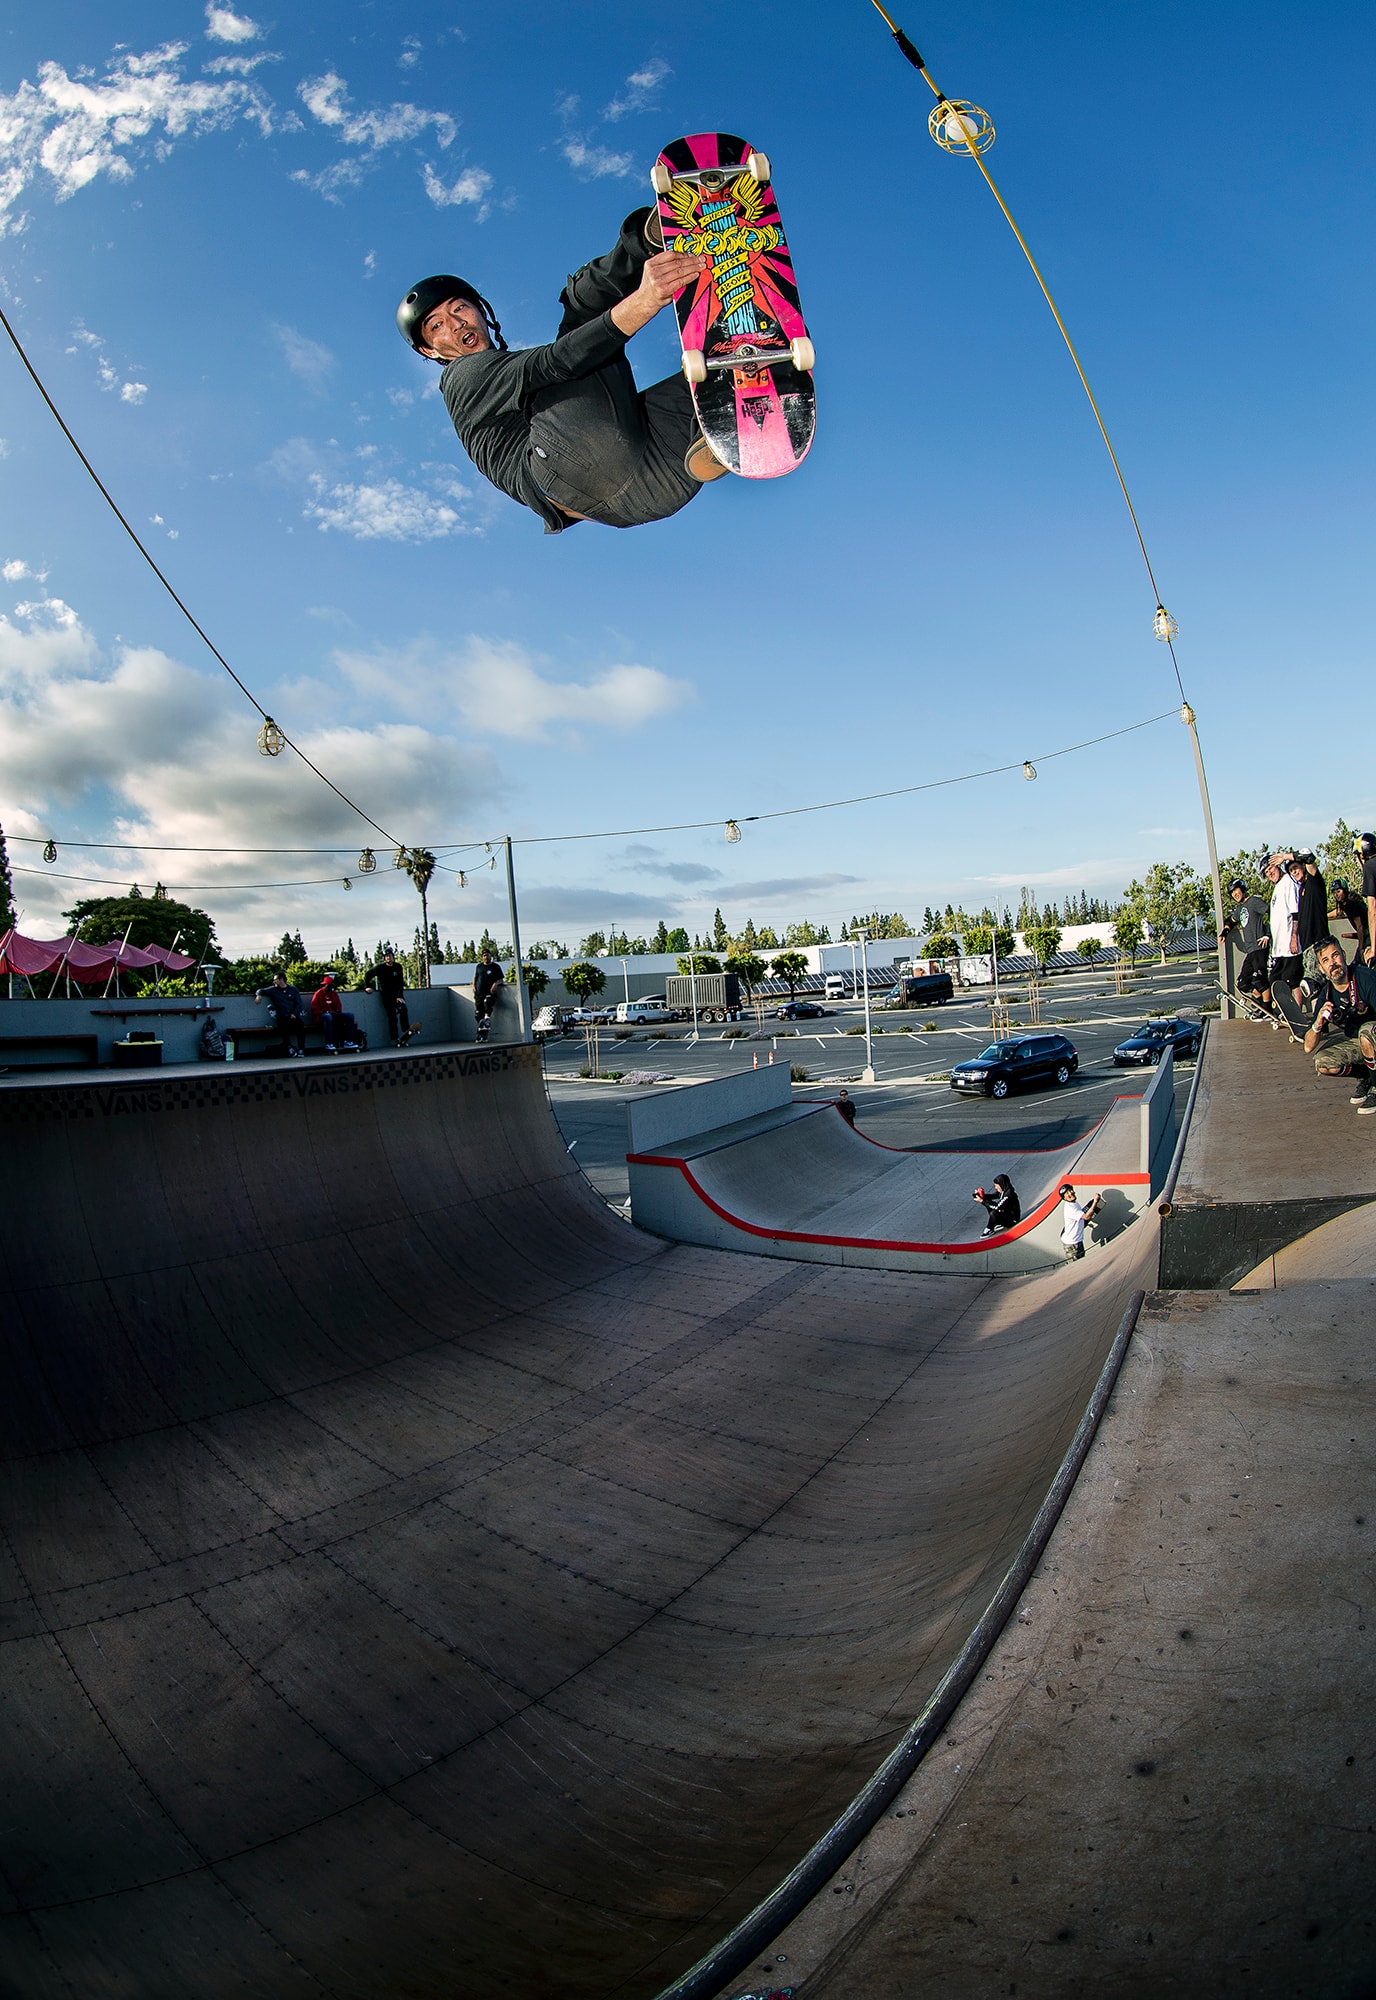 JEFF GROSSO'S BIRTHDAY SESSION—PHOTOS BY DAVE SWIFT